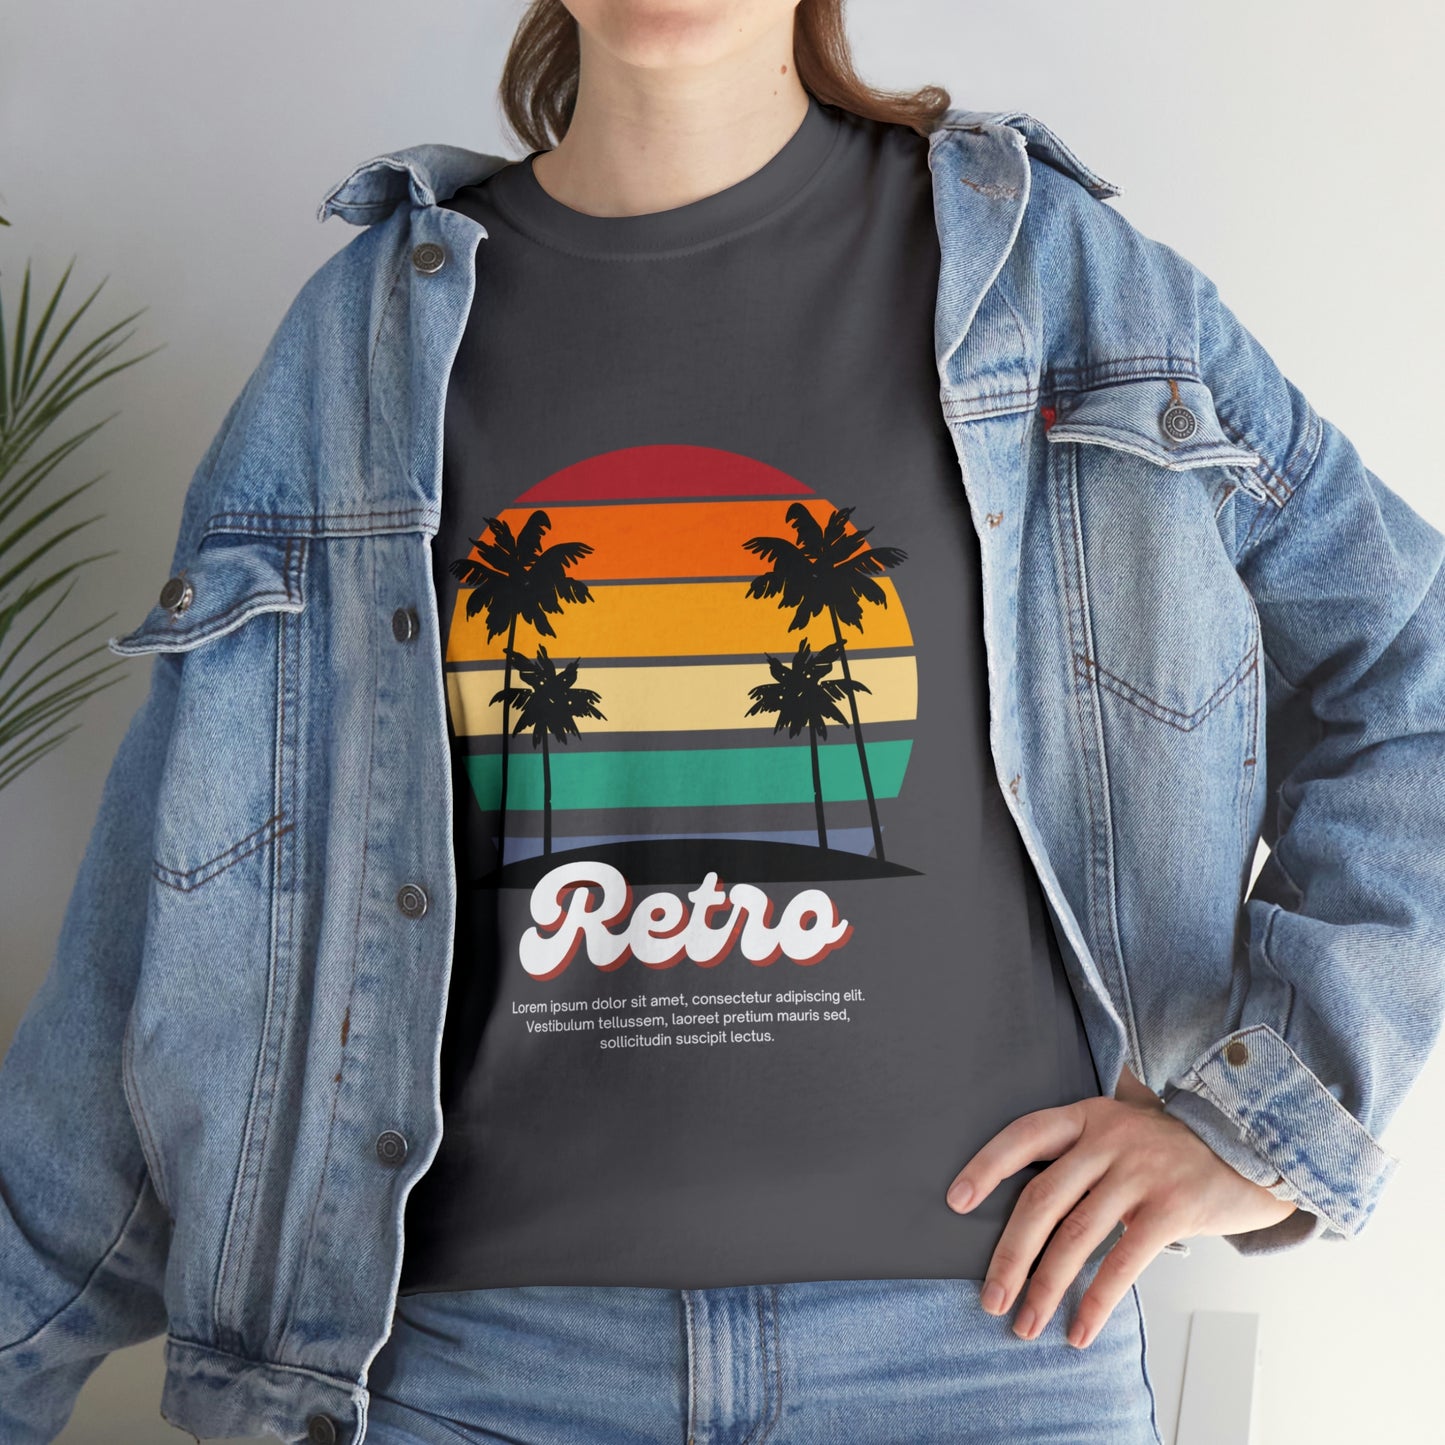 Retro Your Style  Our Custom Printed Tee Unique Design Comfortable Fit  Personalized for You.  color, funny tshirt tee shirt motivation